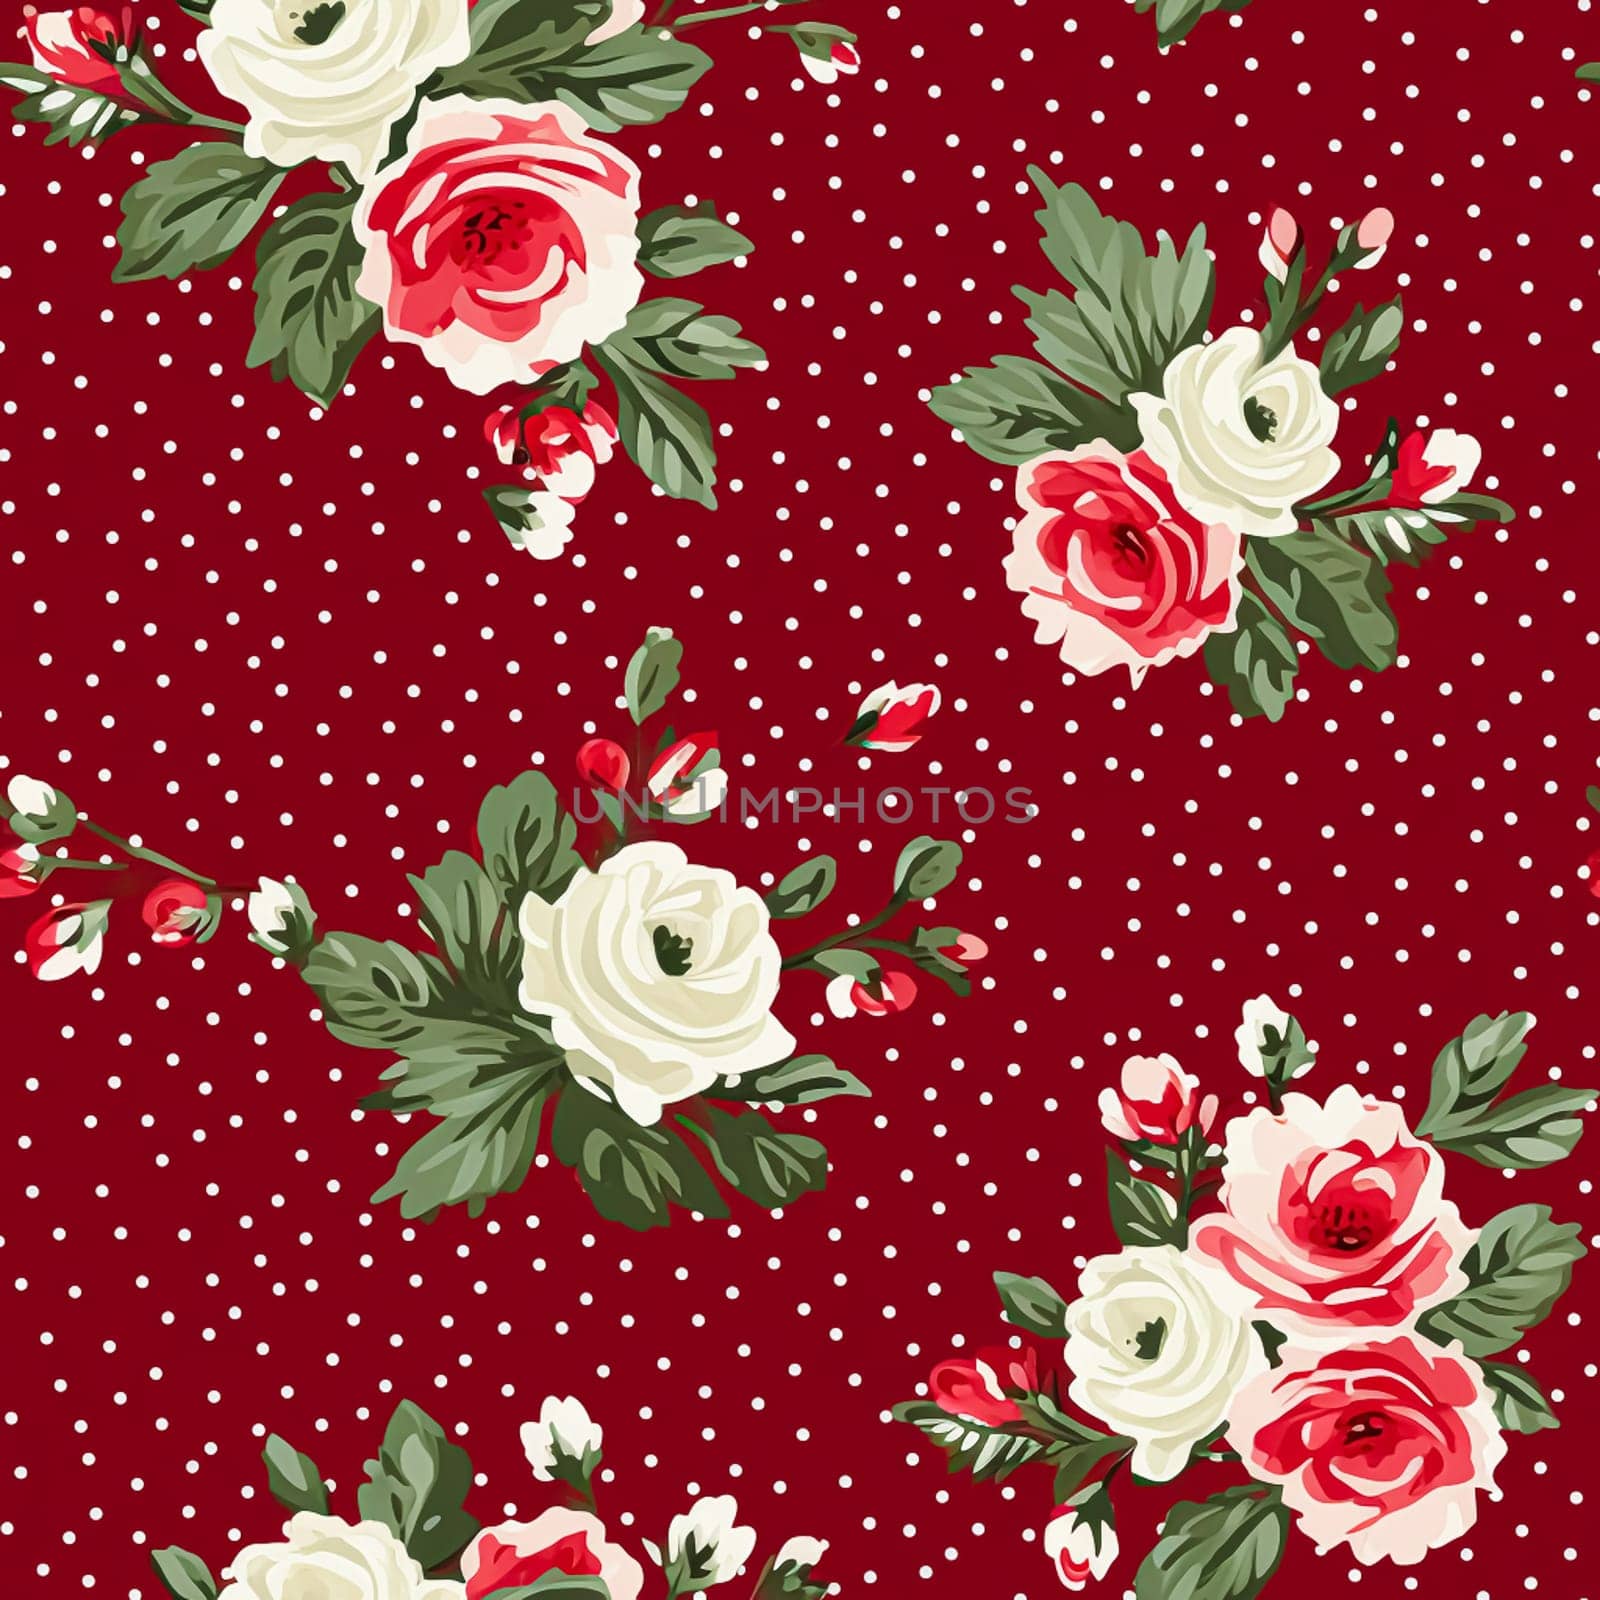 Seamless pattern, tileable Christmas holiday floral, country flowers dots print, English countryside roses for wallpaper, wrapping paper, scrapbook, fabric and product design by Anneleven